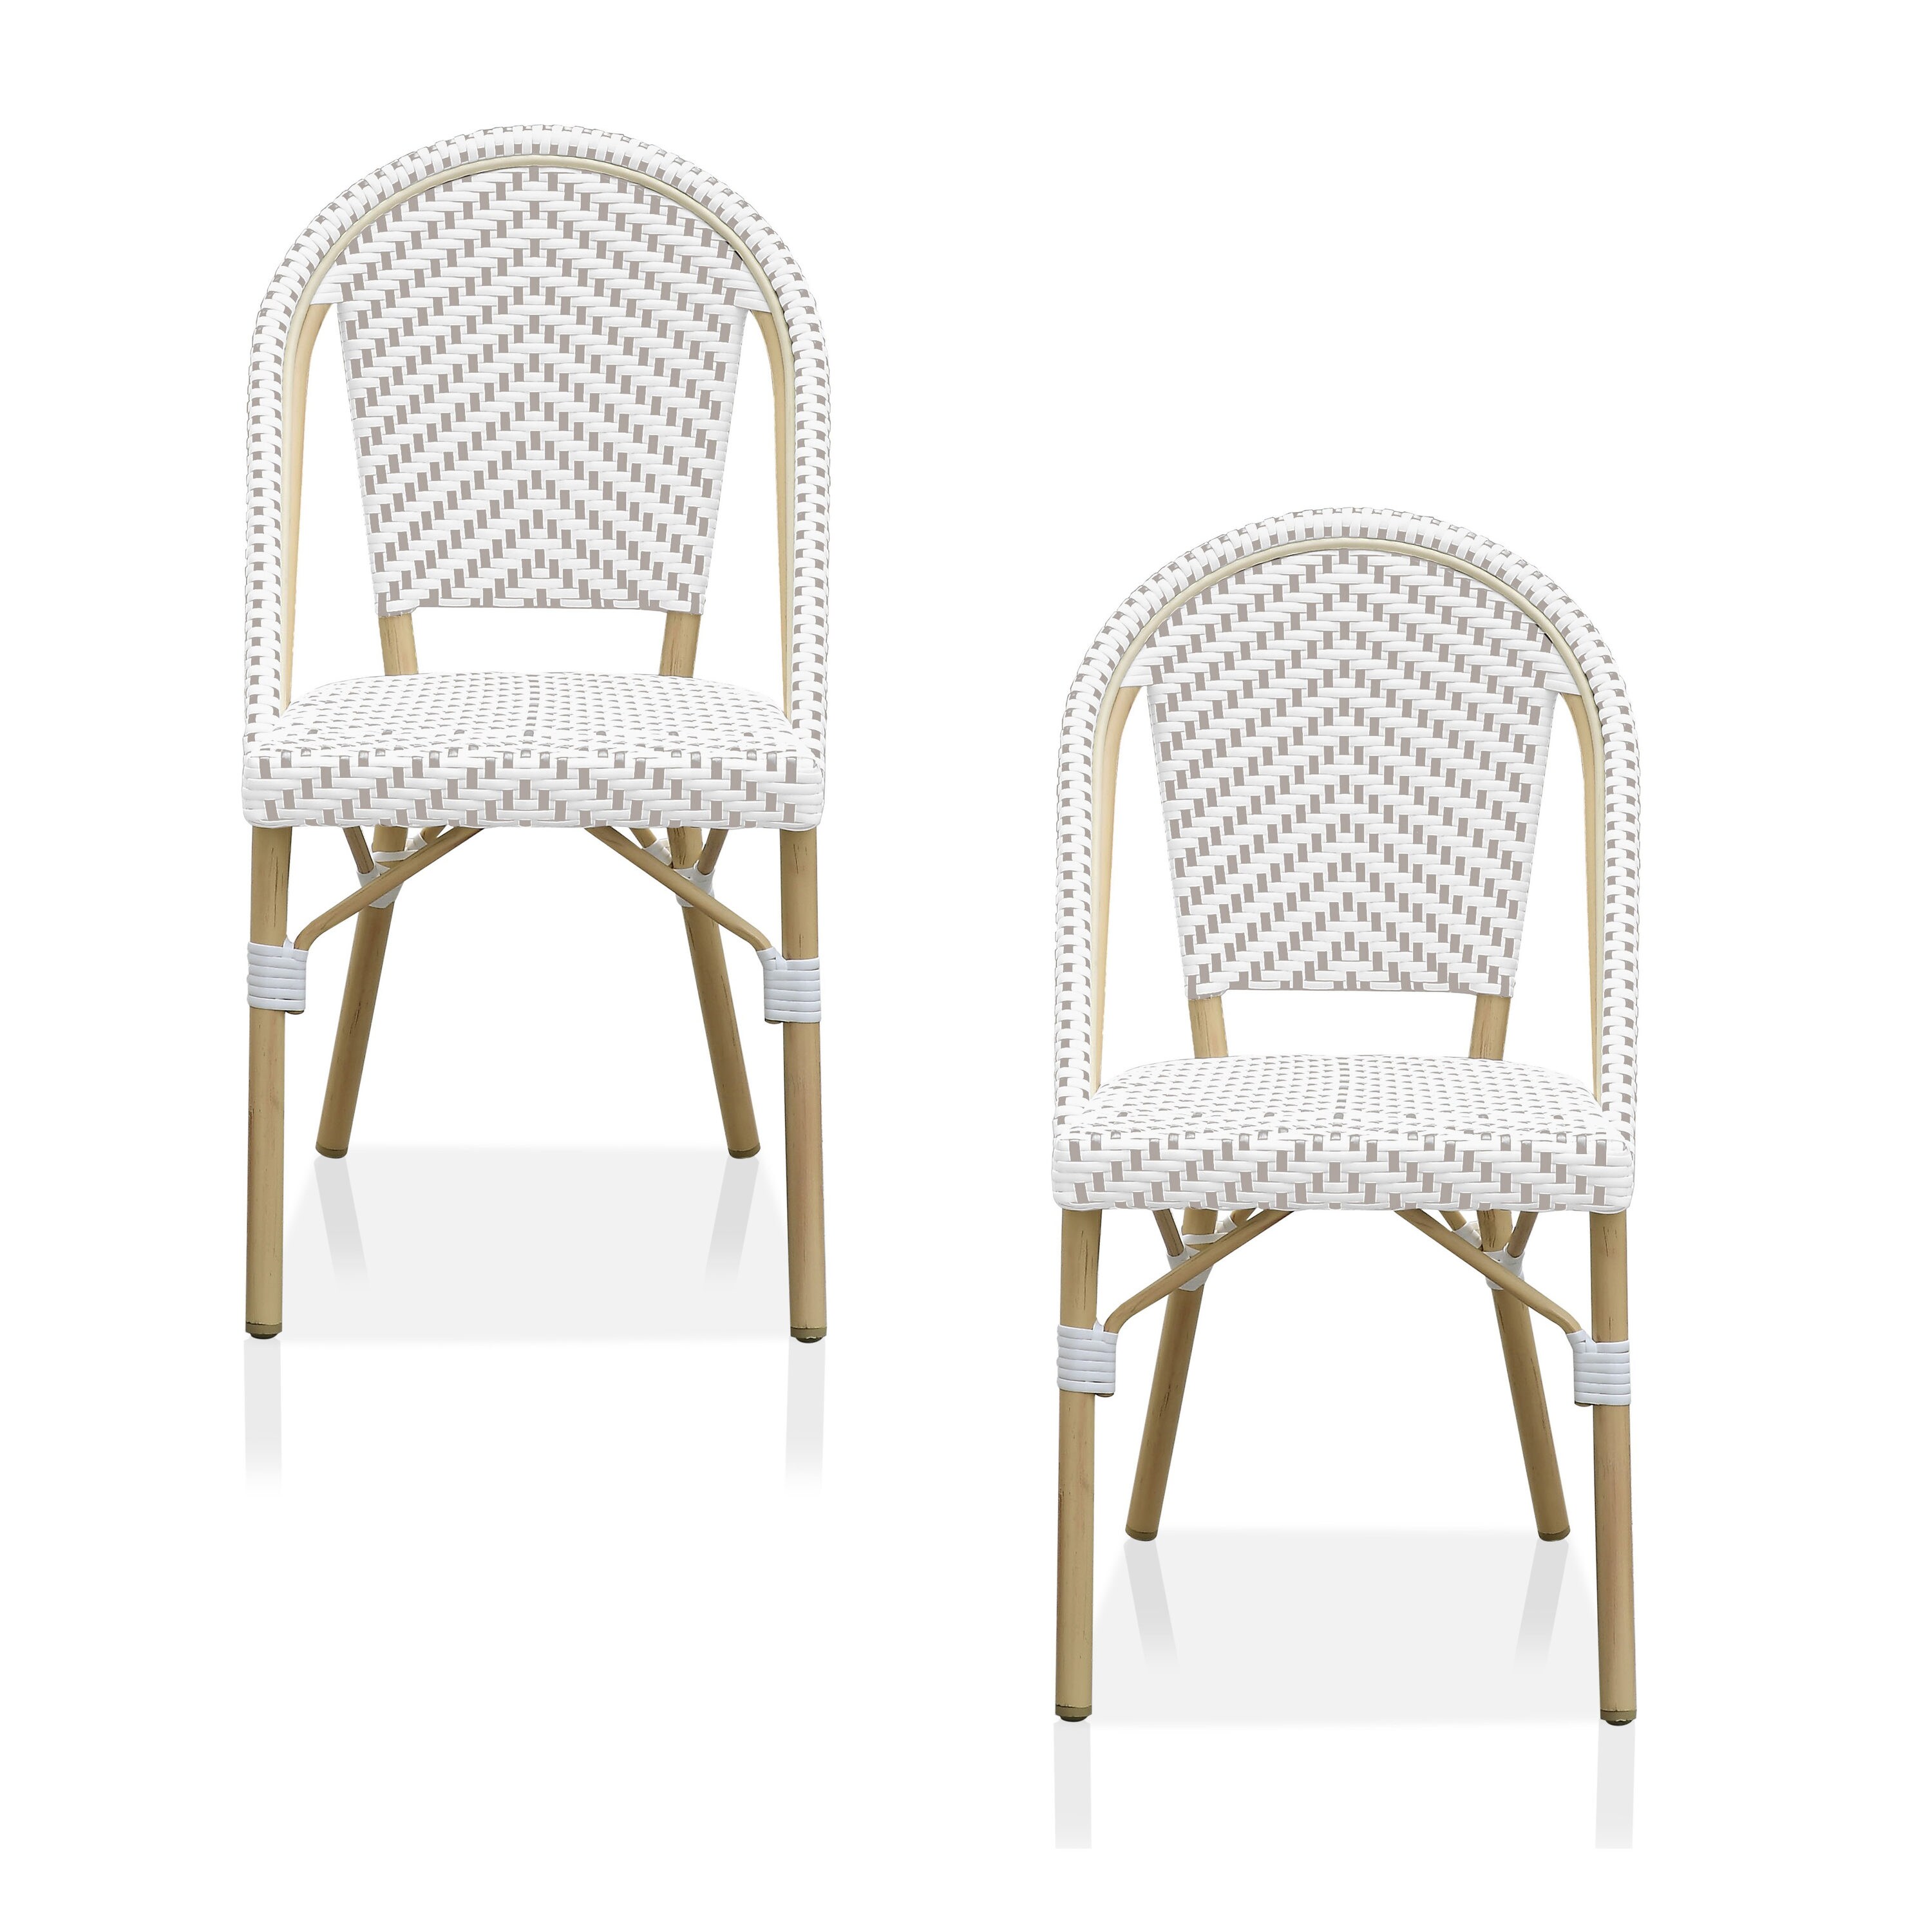 Patio Armchair Aluminum PE Wicker Stationary in White/Black Finish 2-Pack 